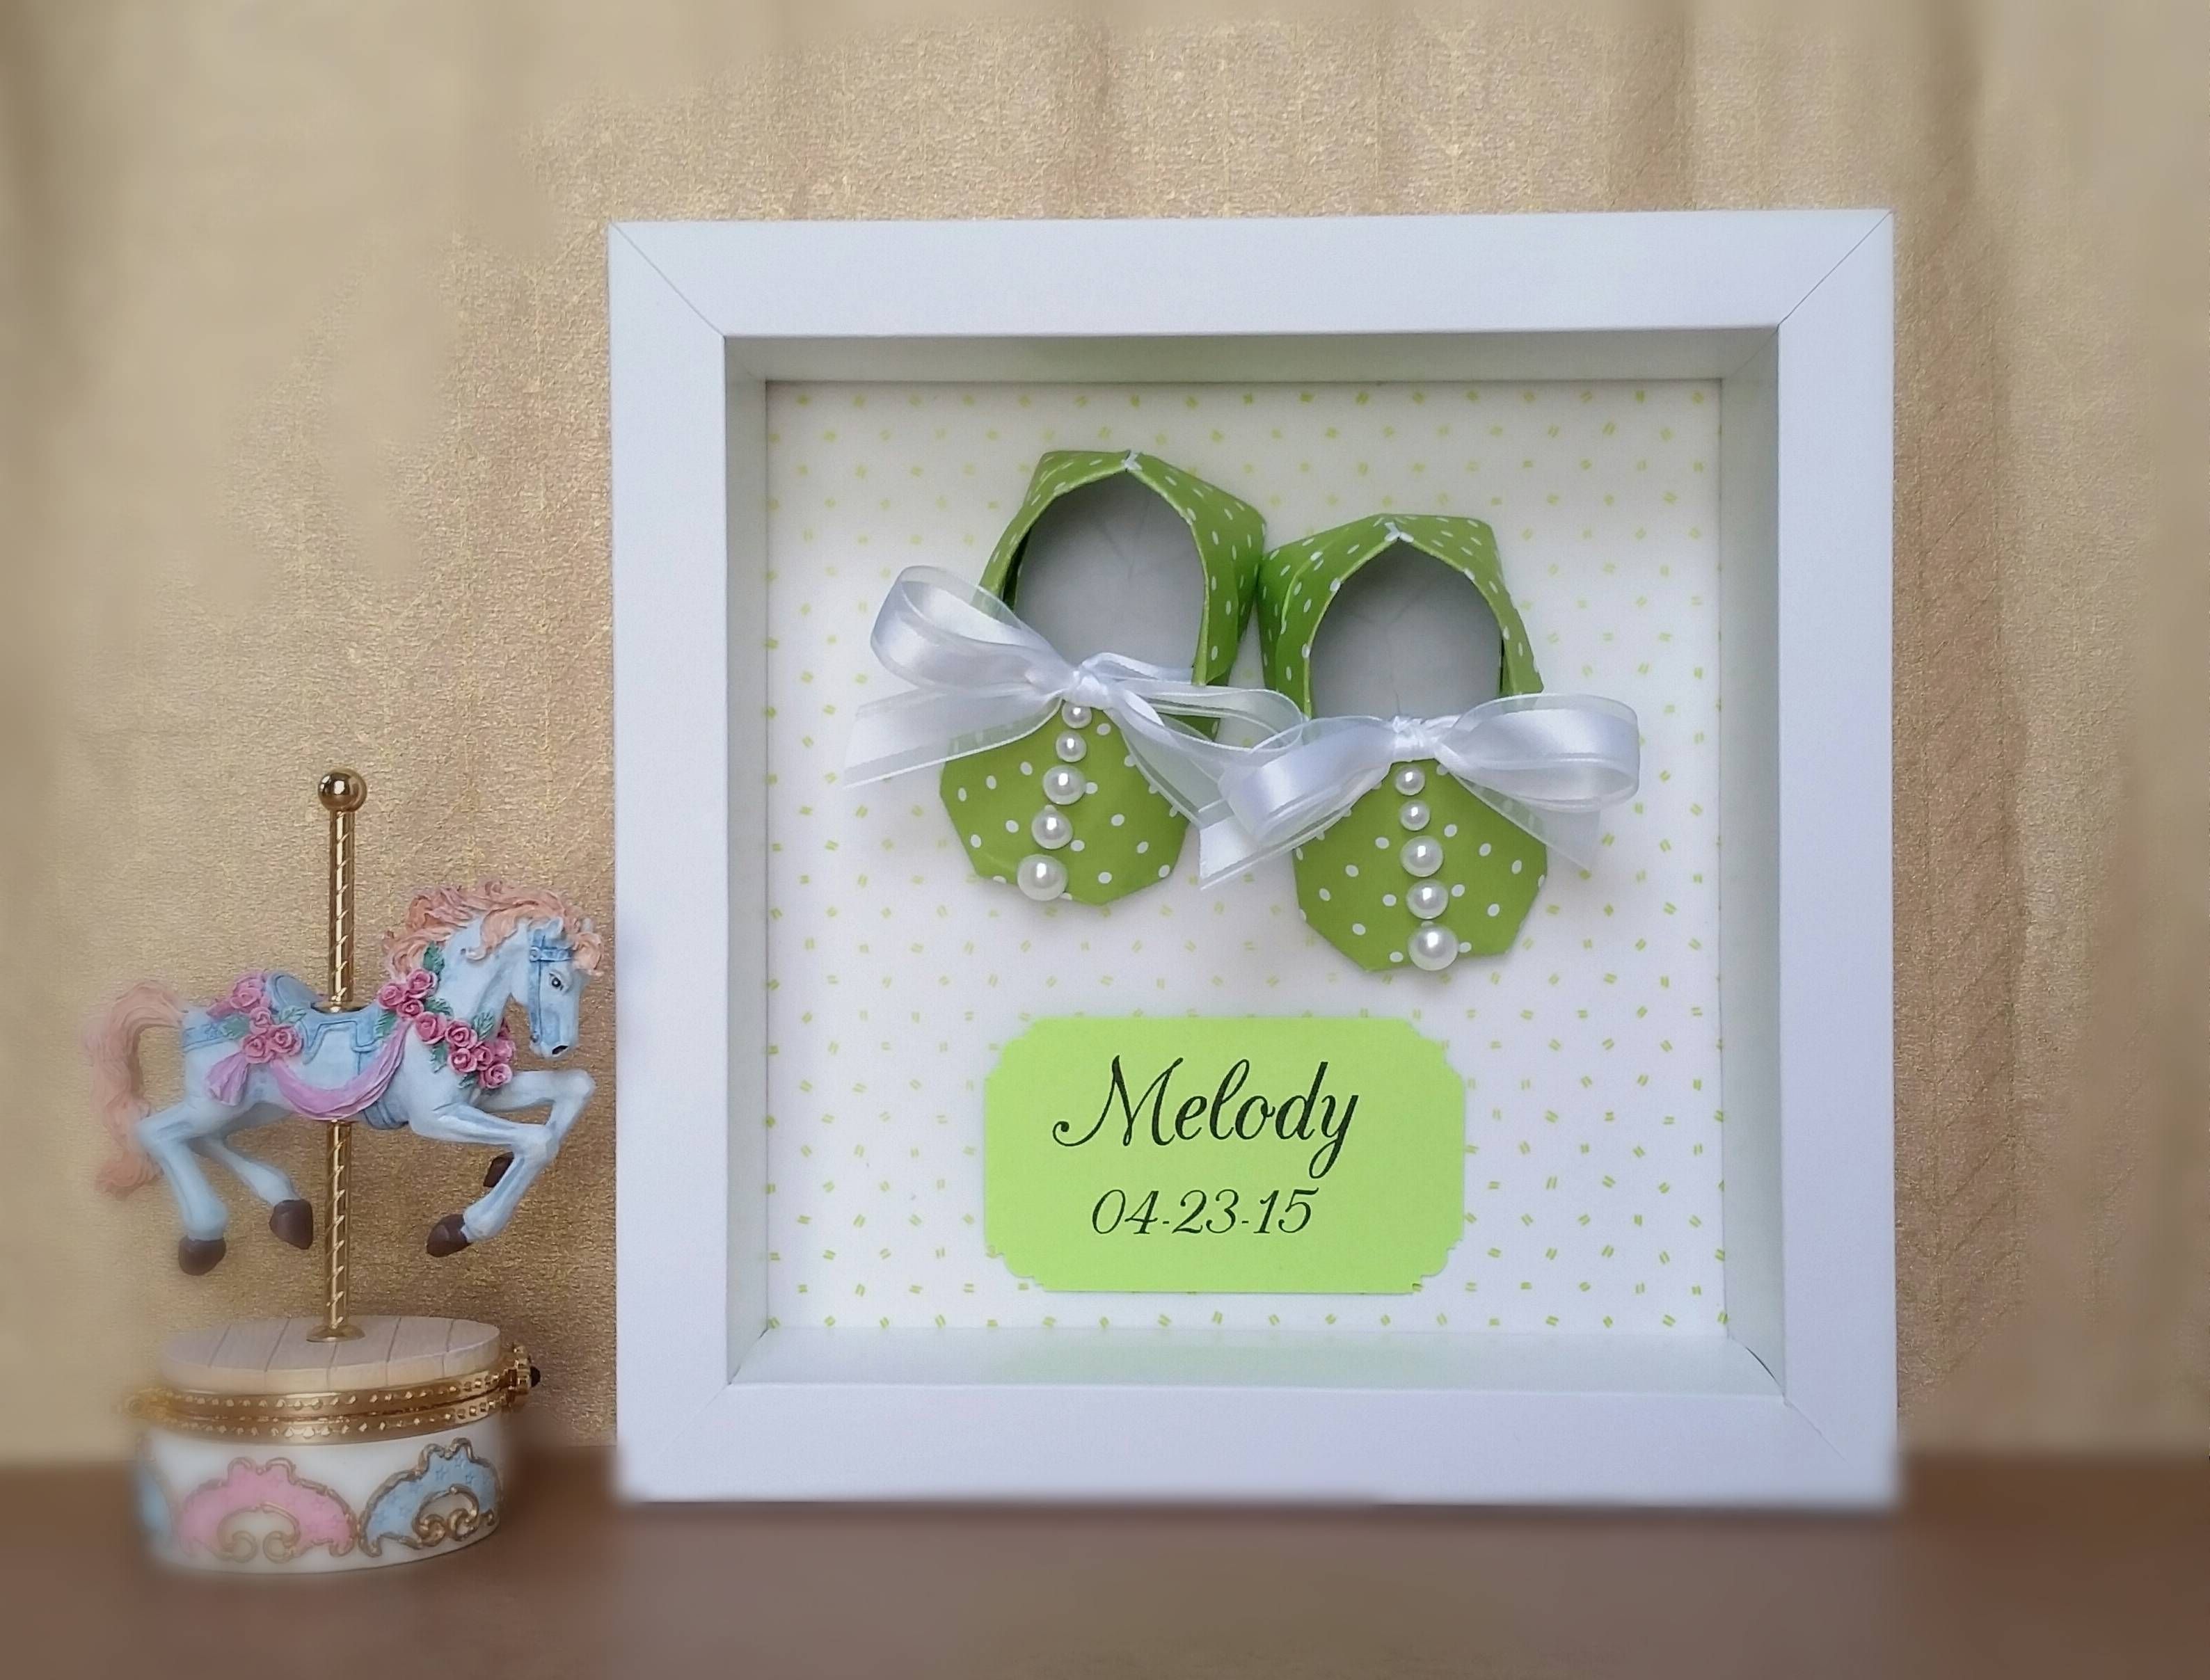 Nursery Decor, Origami Baby Shoes Booties Framed 3d Wall Art Inside Most Recent 3d Wall Art For Baby Nursery (View 1 of 20)